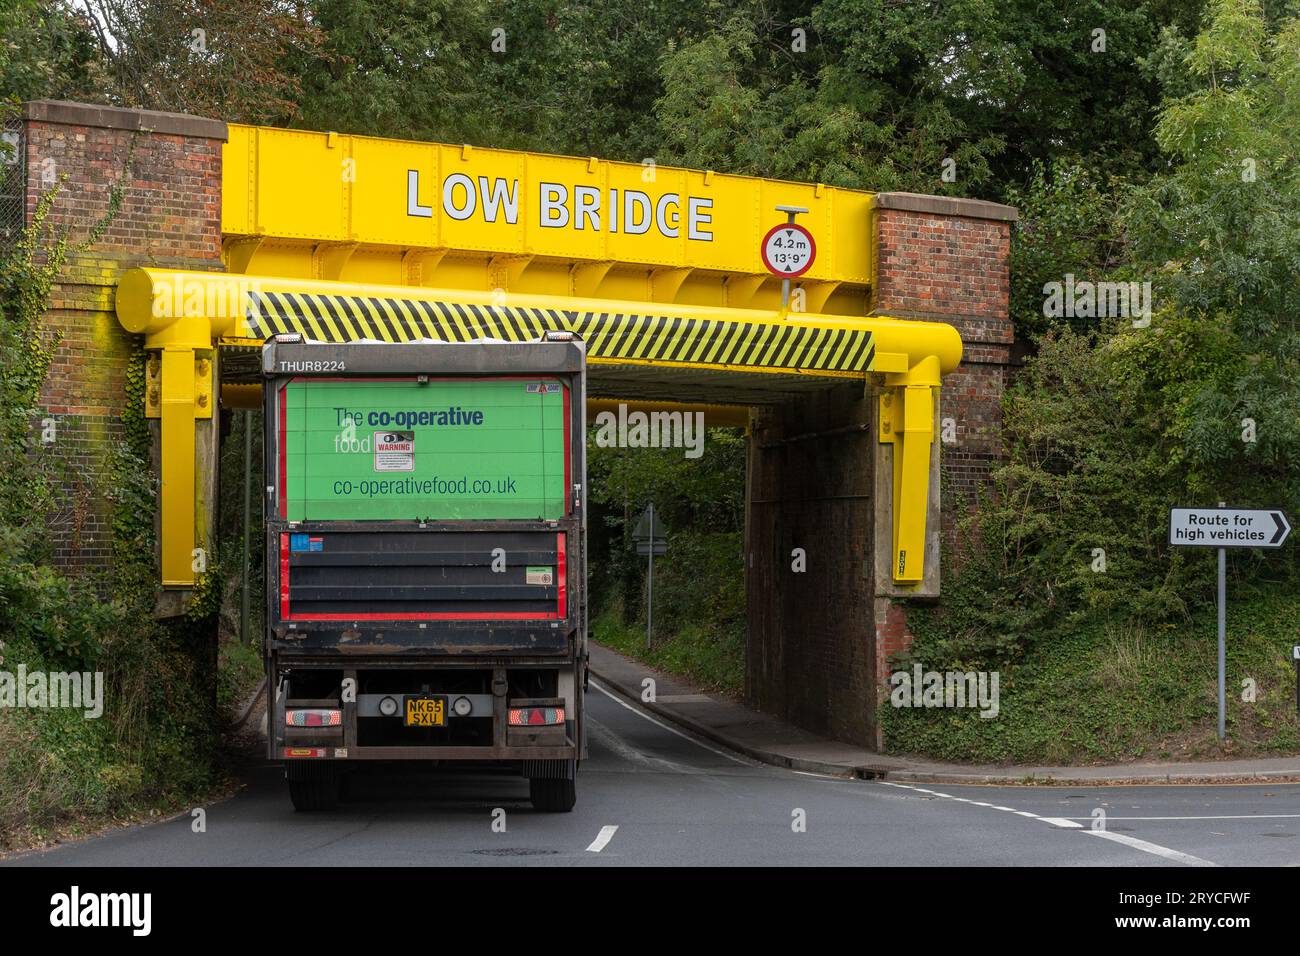 A railway bridge frequently hit by high vehicles lorries trucks recently painted bright yellow, Wrecclesham, Surrey, England, UK. Low bridge Stock Photo